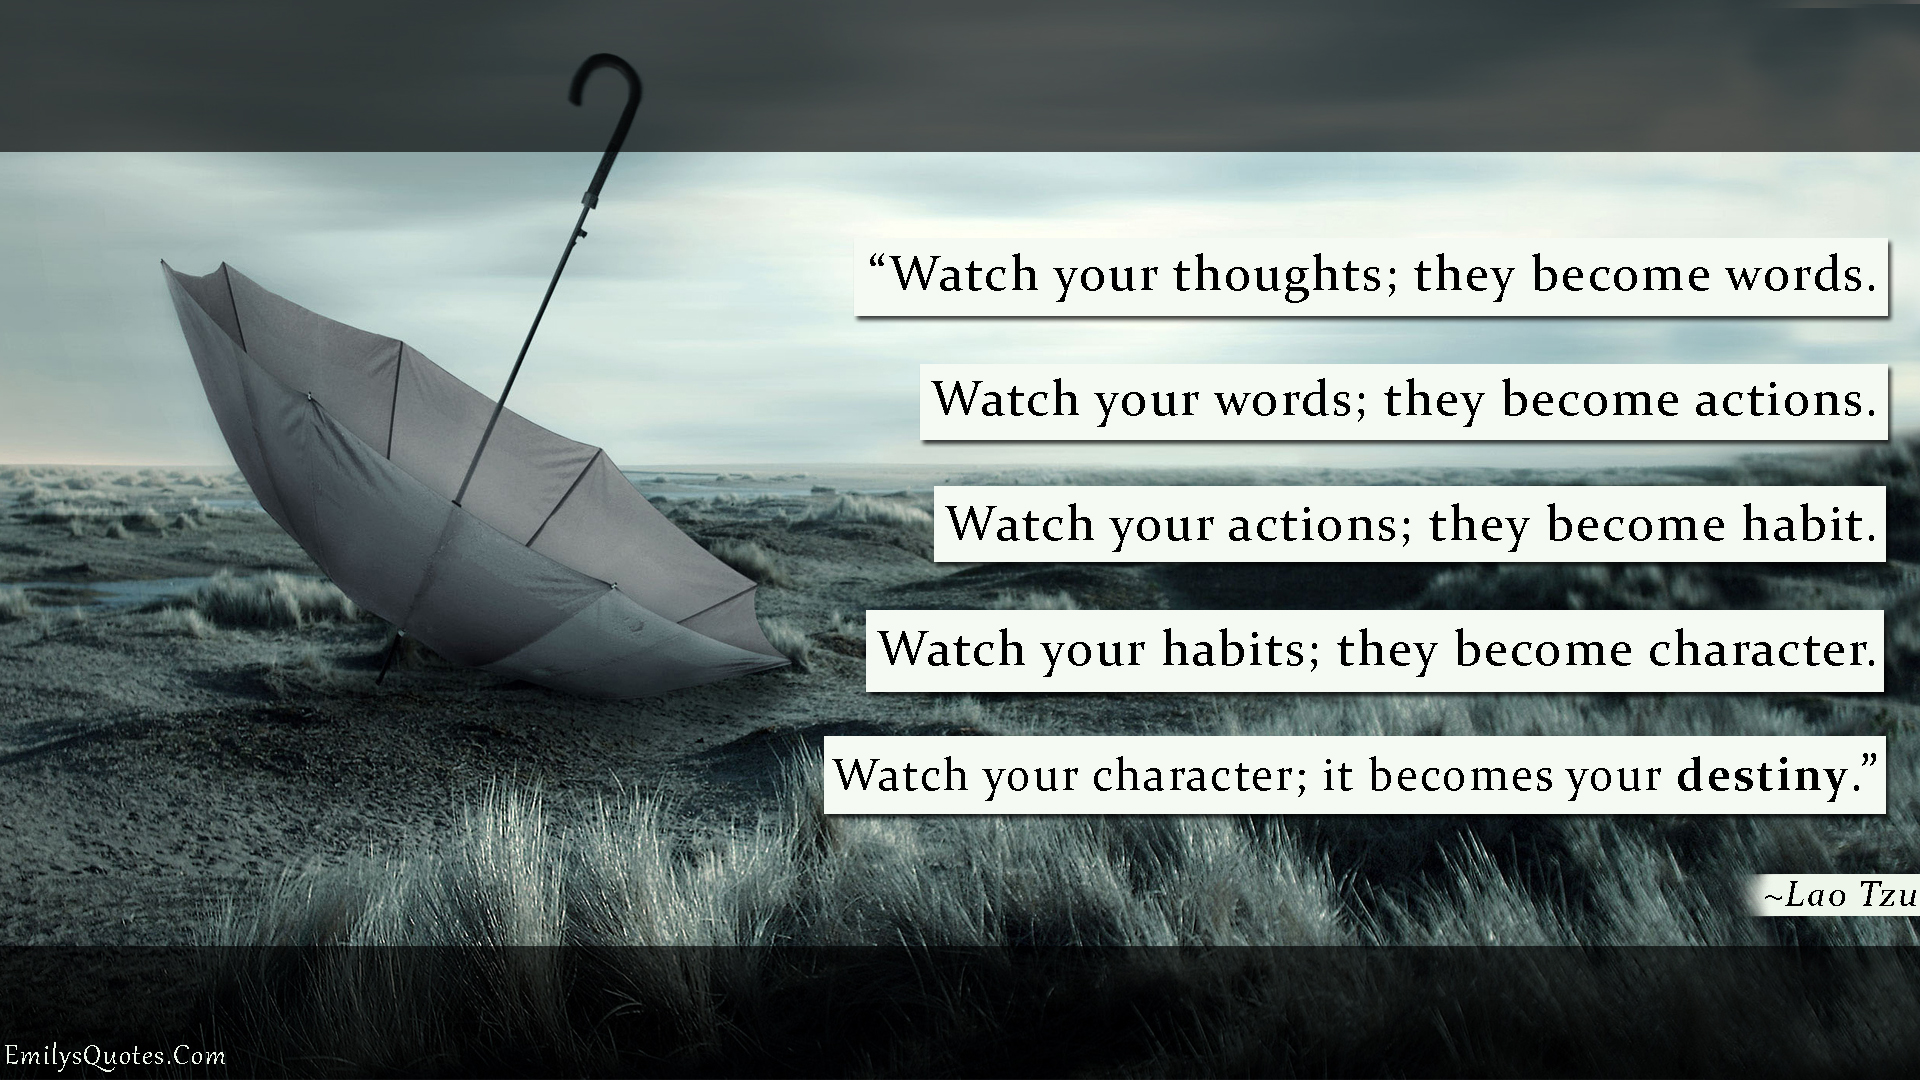 Watch your thoughts; they become words. Watch your words; they become actions. Watch your actions; they become habit. Watch your habits; they become character. Watch your character; it becomes your destiny